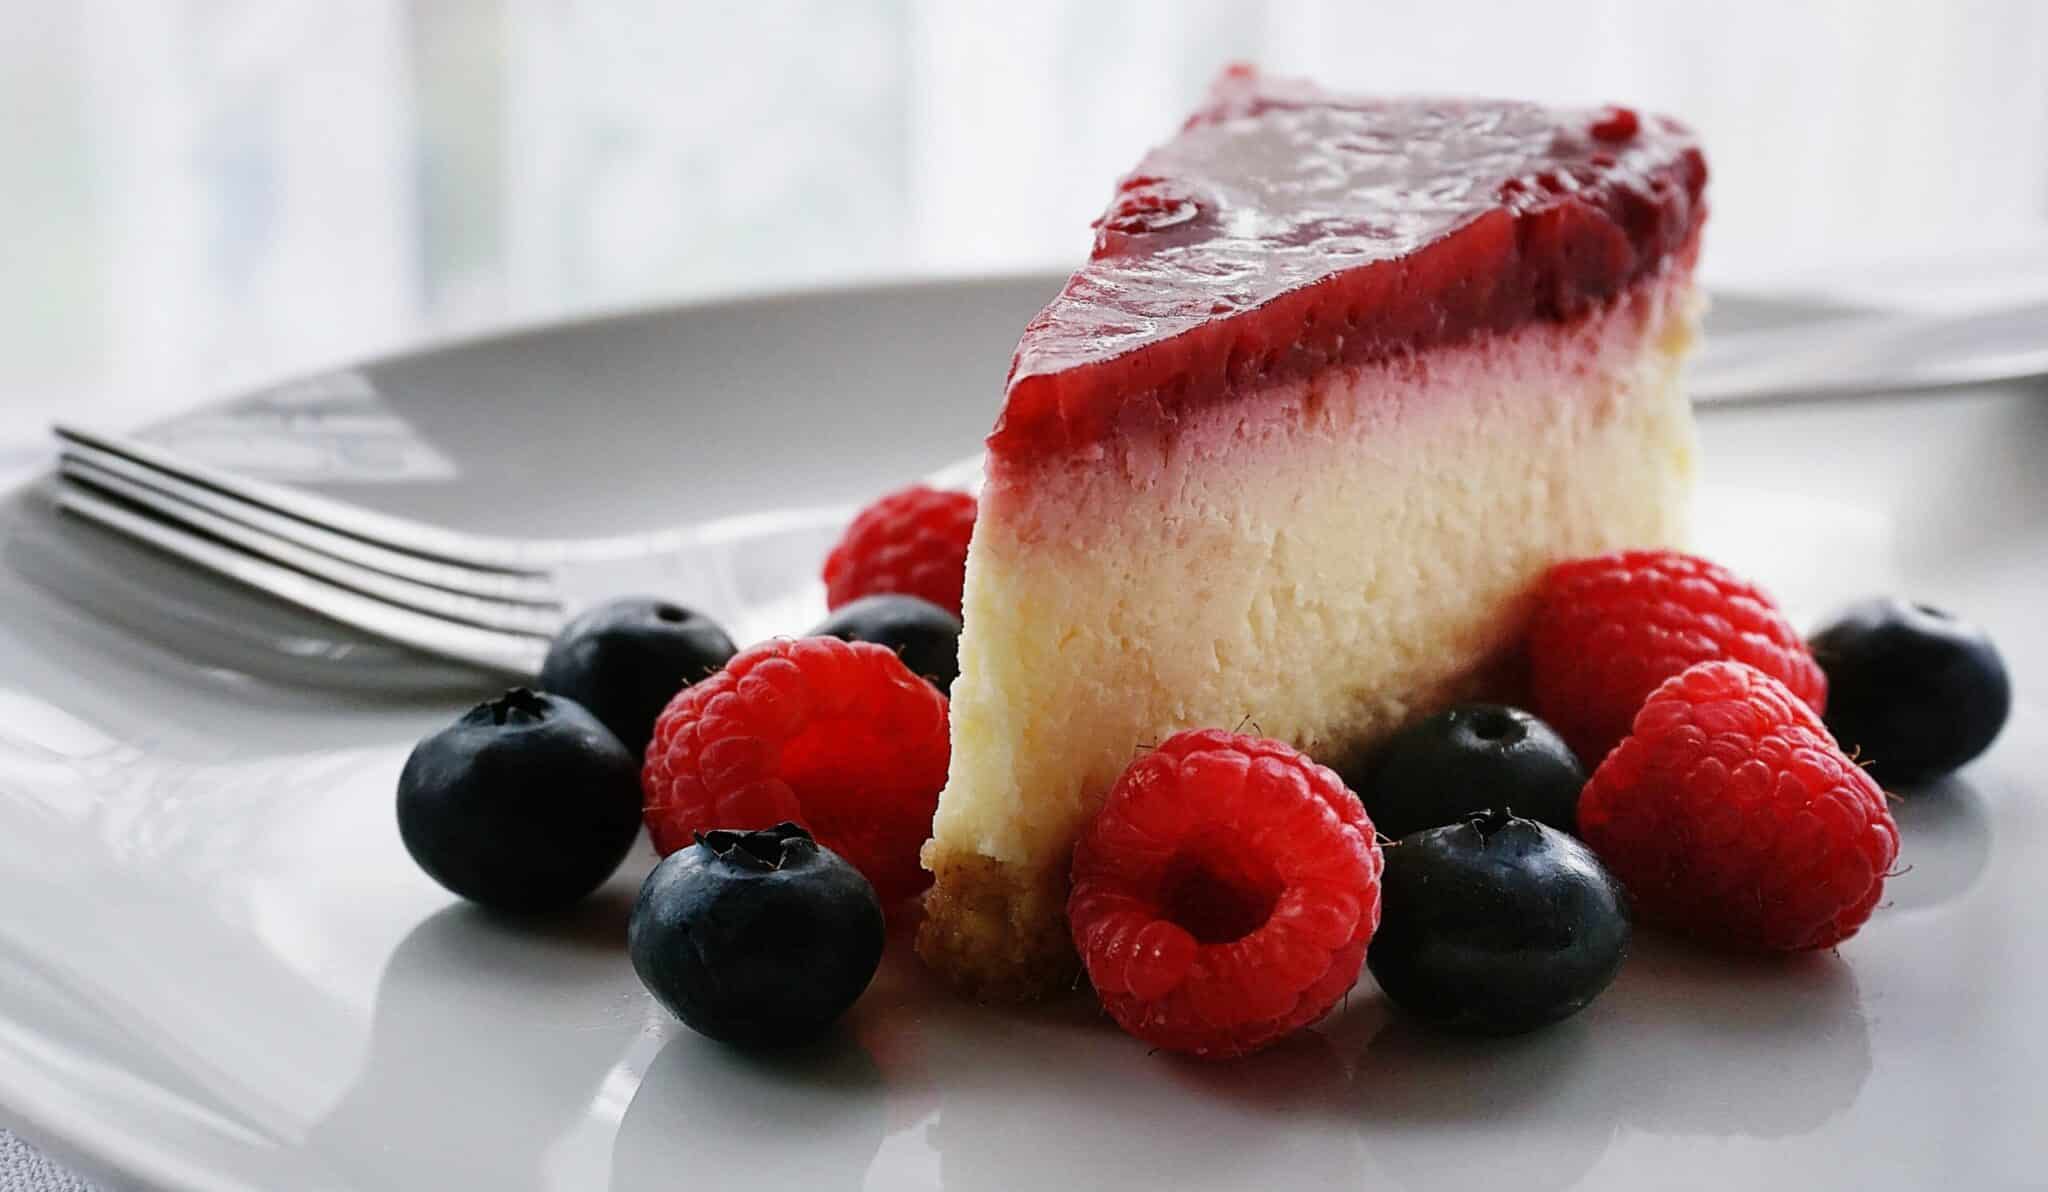 10 Easy Tips to Help Make Your Cheesecake Turn Out Perfect Every Time